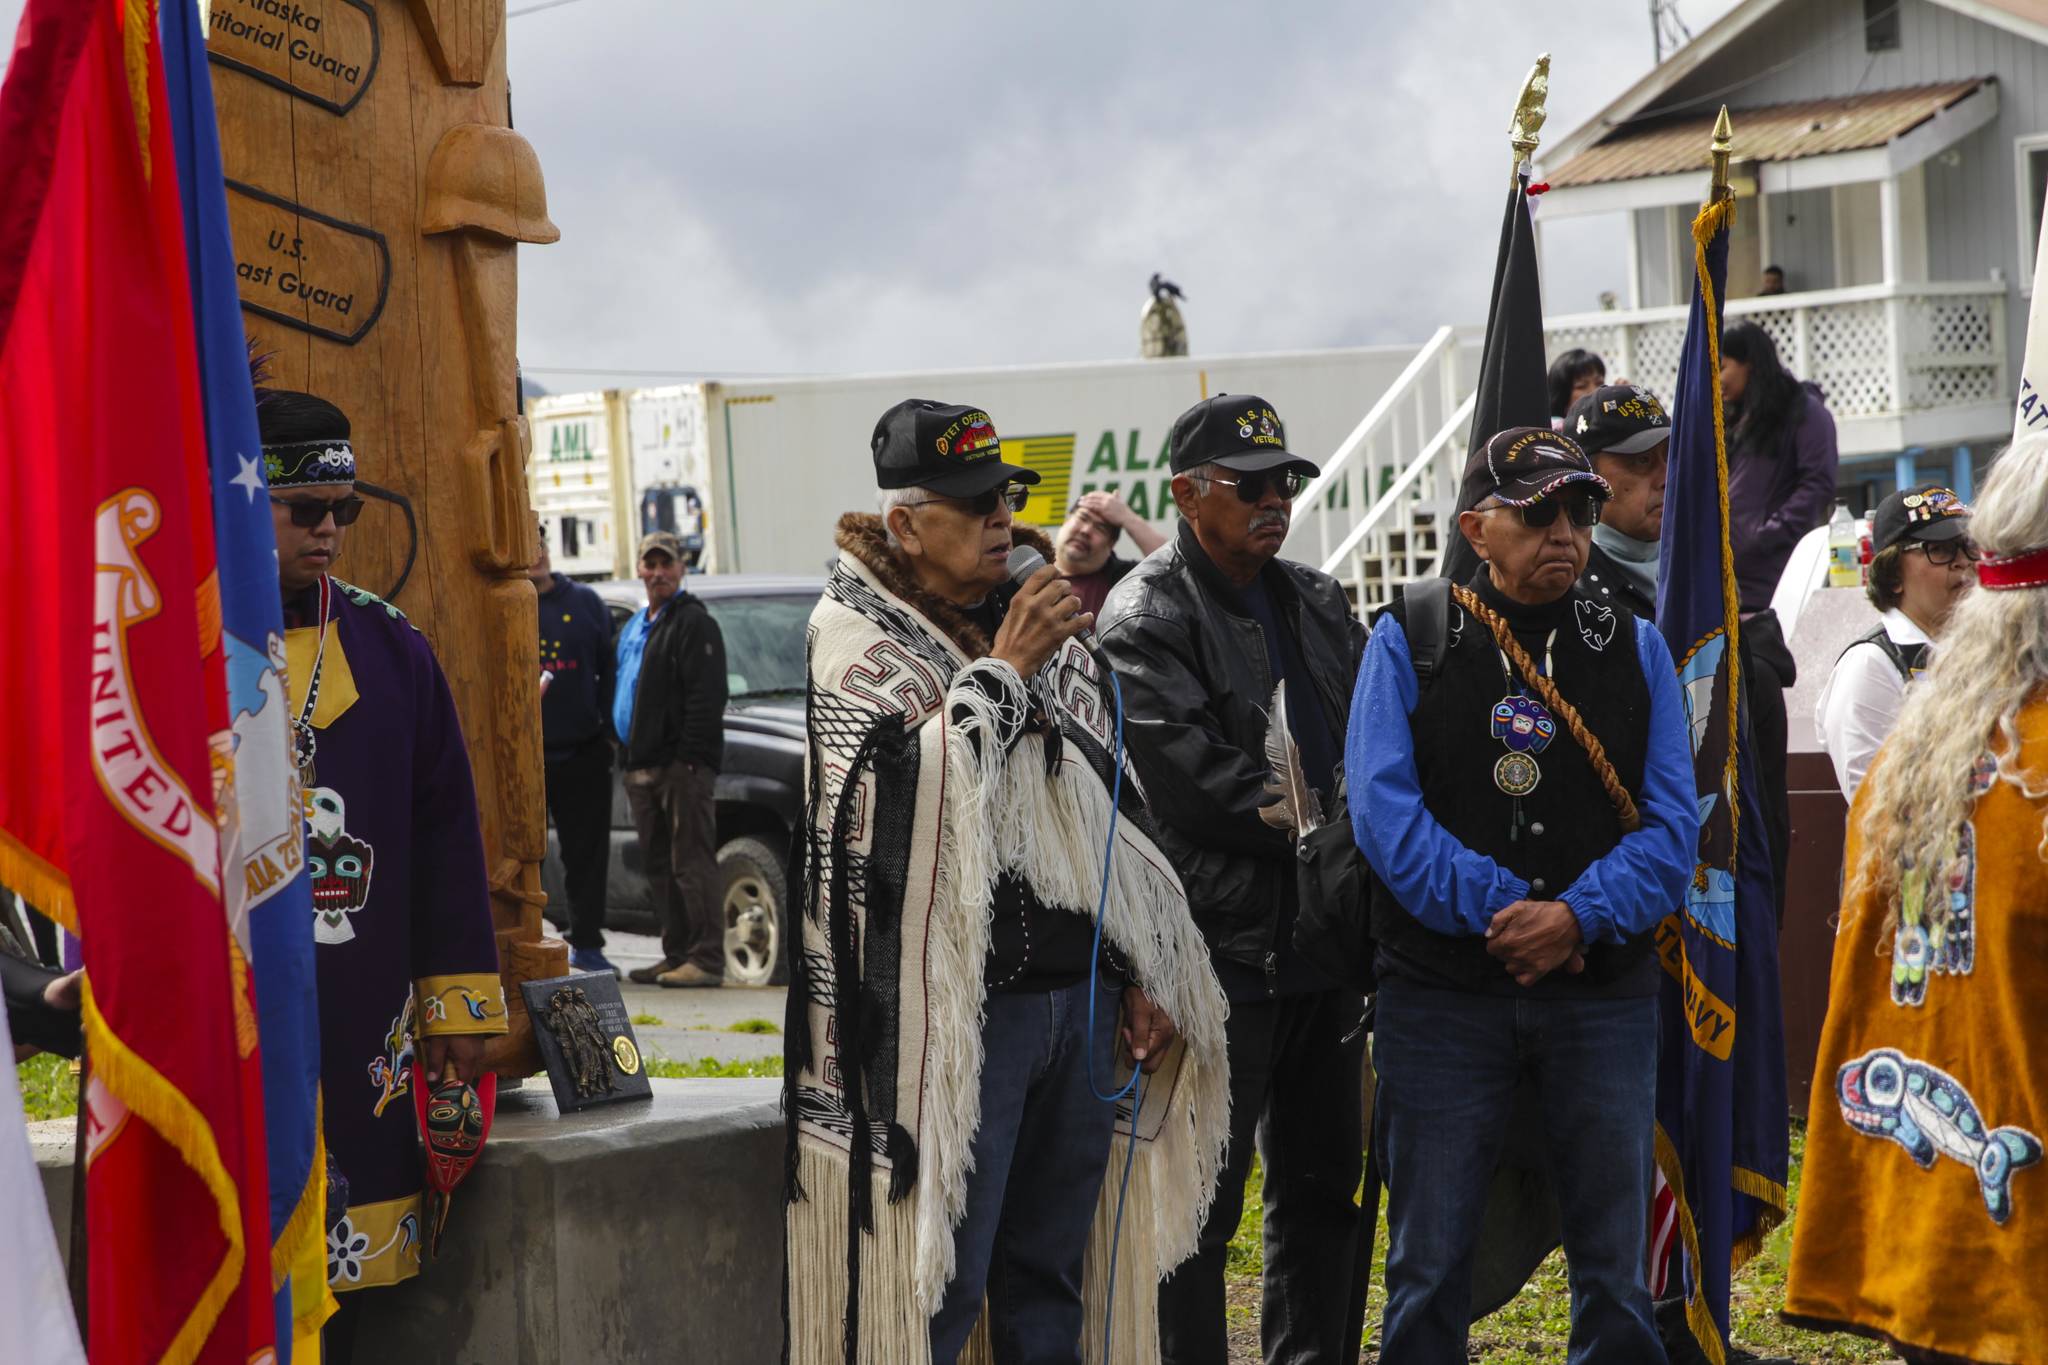 George Bennett Sr., a Vietnam War veteran, speaks during a ceremony for the raising of a totem pole honoring veterans of the armed services in Hoonah on July 24, 2021. (Michael S. Lockett / Juneau Empire)